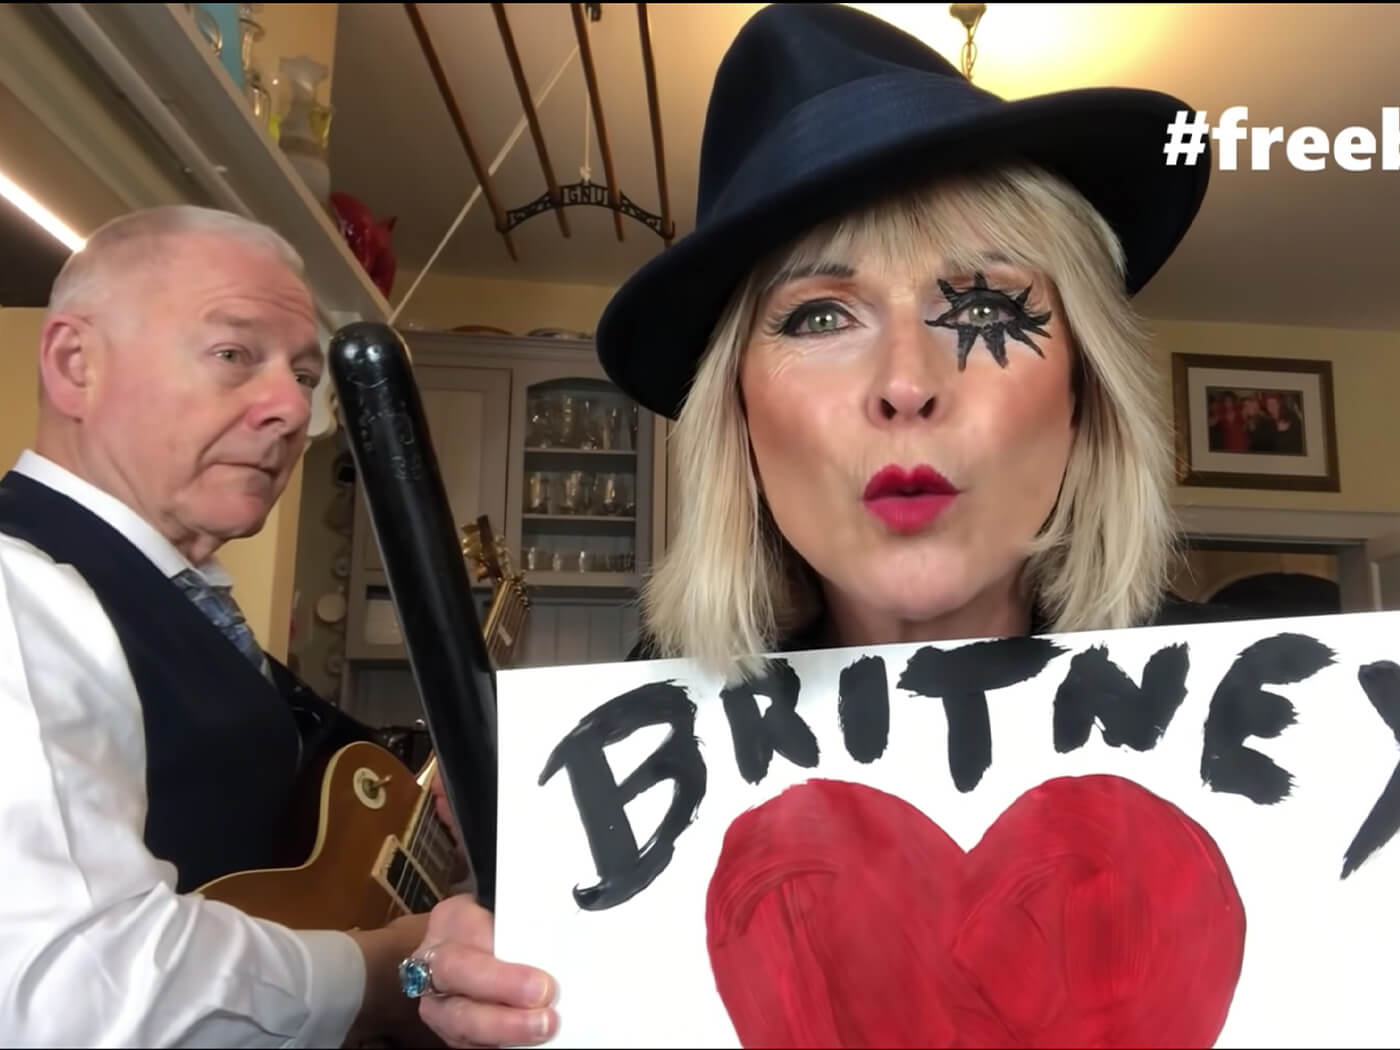 Robert Fripp and Toyah Willcoxx cover Britney Spears' Toxic